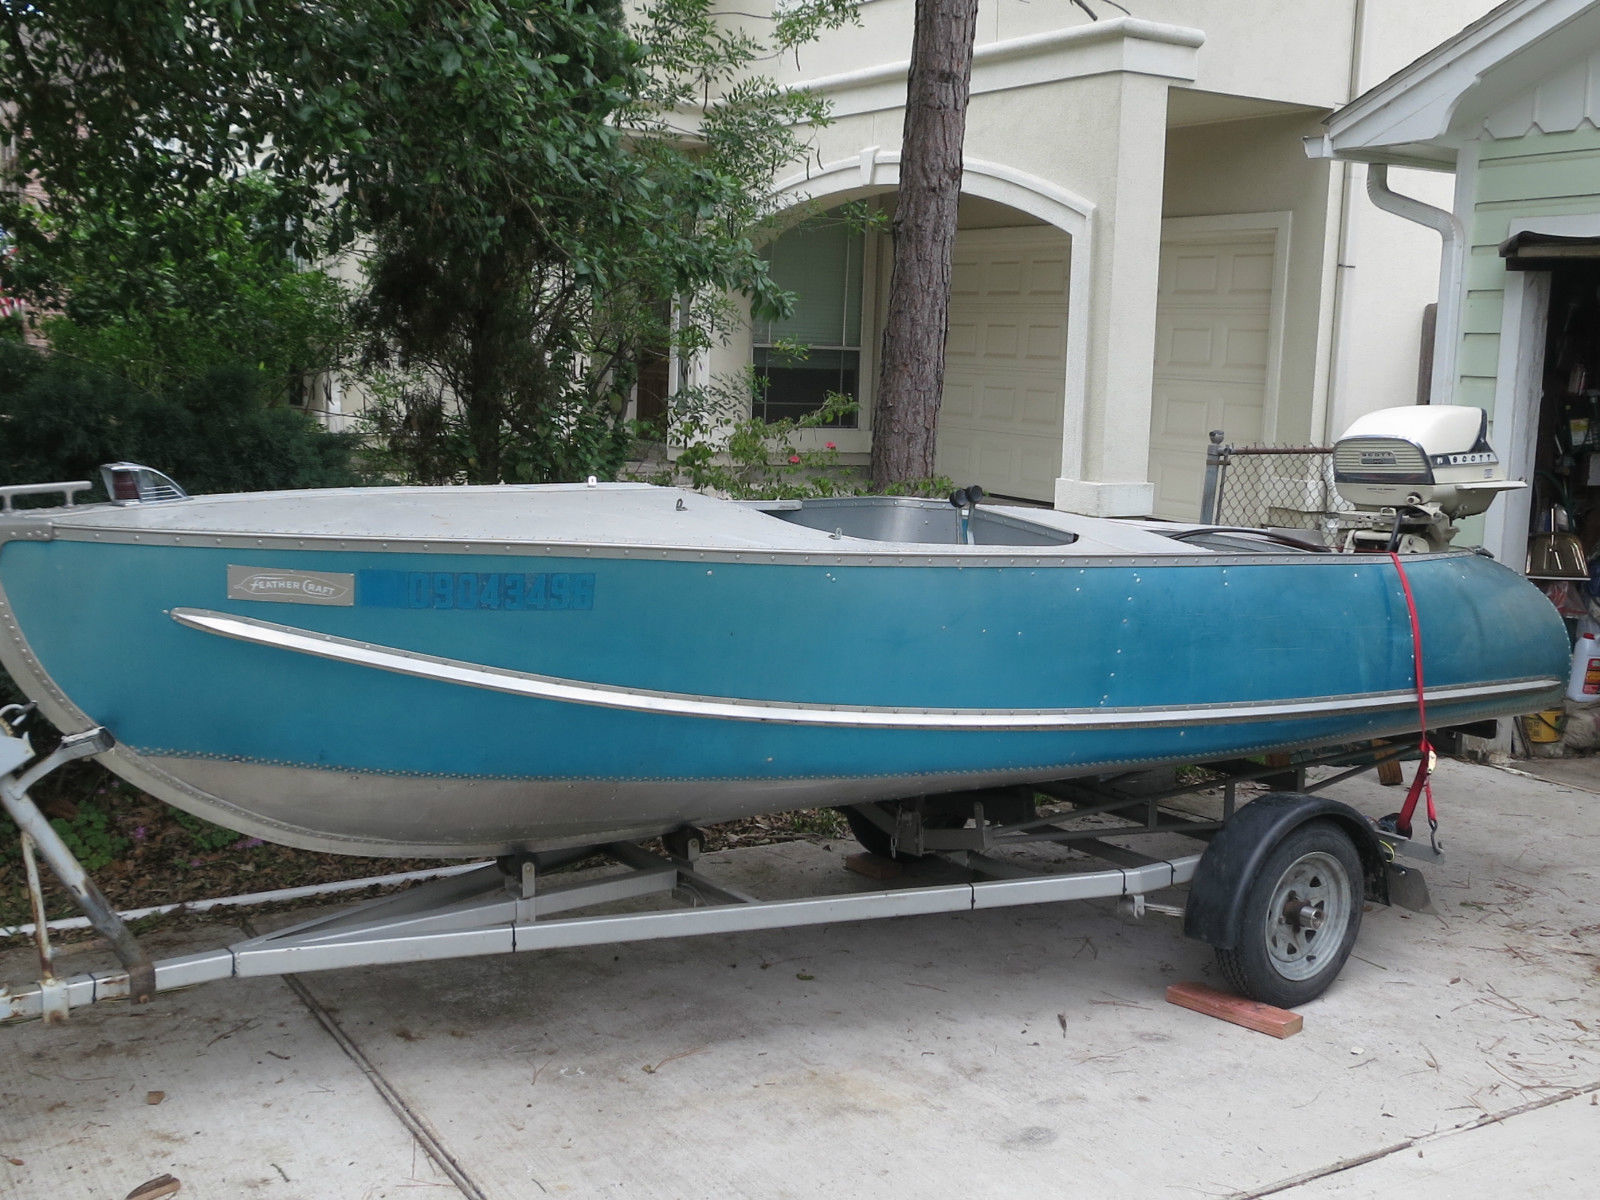 Feathercraft II 1956 for sale for $5,300 Boats-from-USA.com